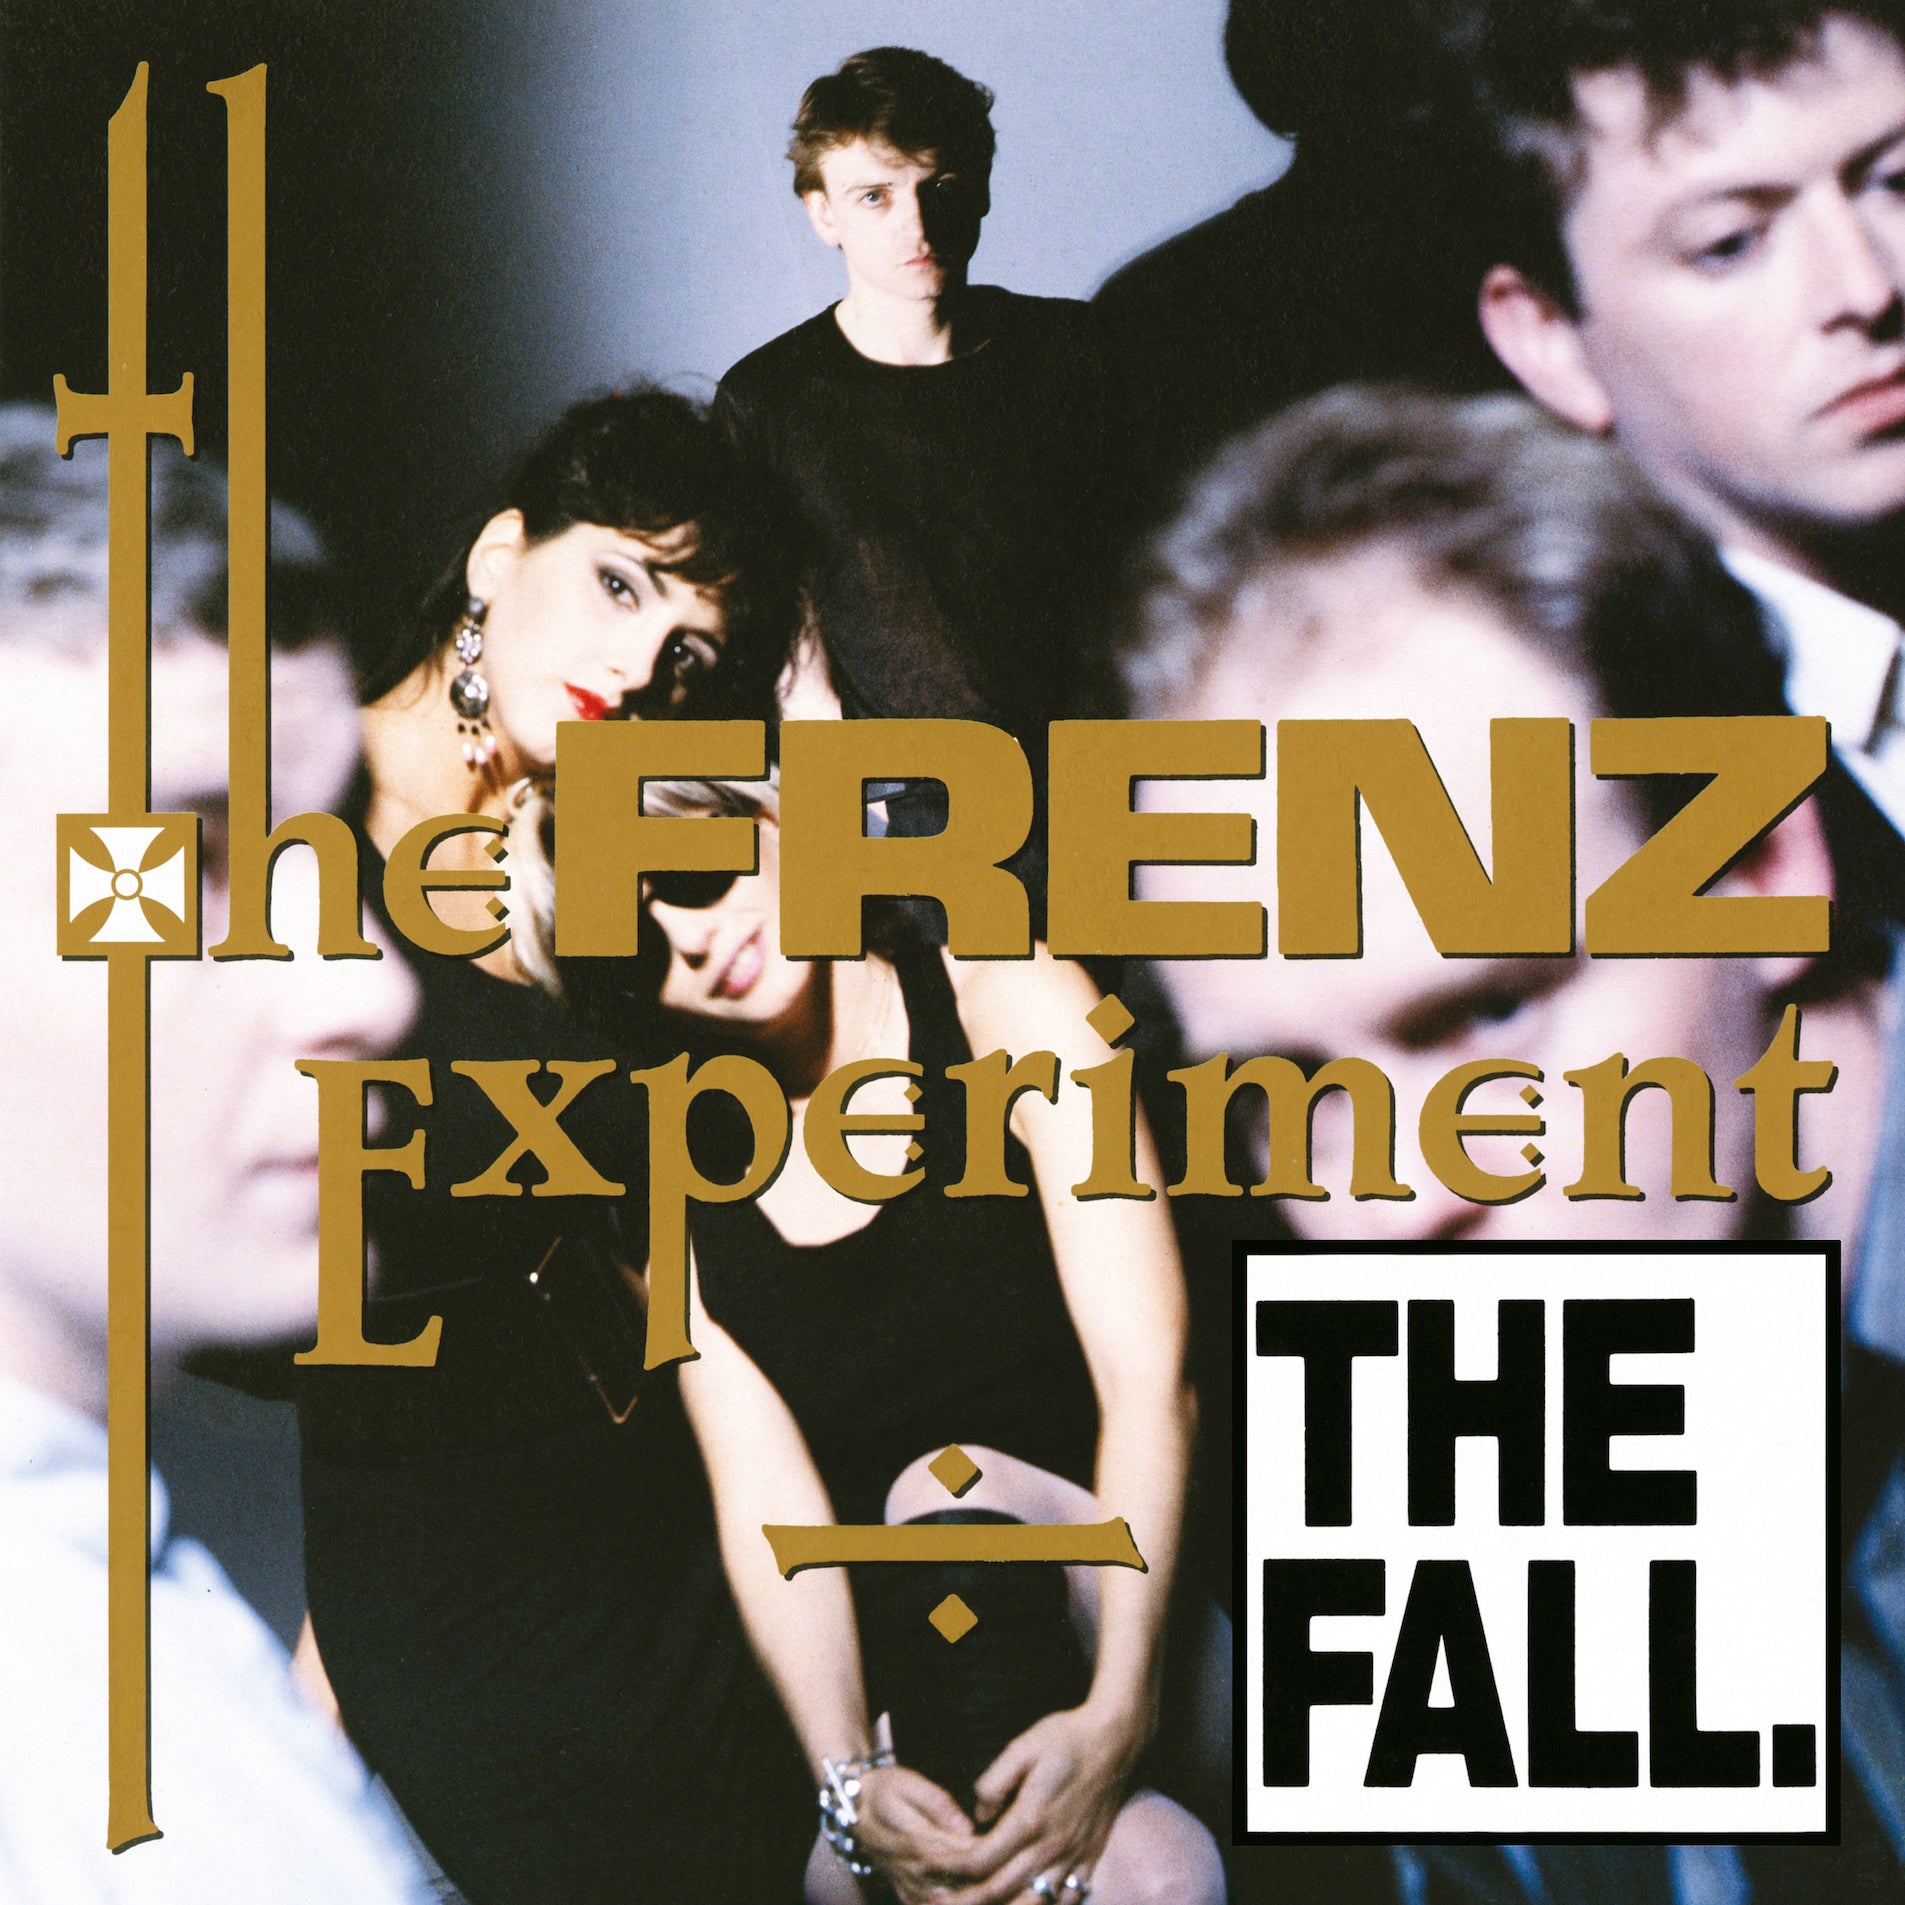 THE FALL - The Frenz Experiment (Expanded Edition) - 2LP - Vinyl [OCT 23rd]